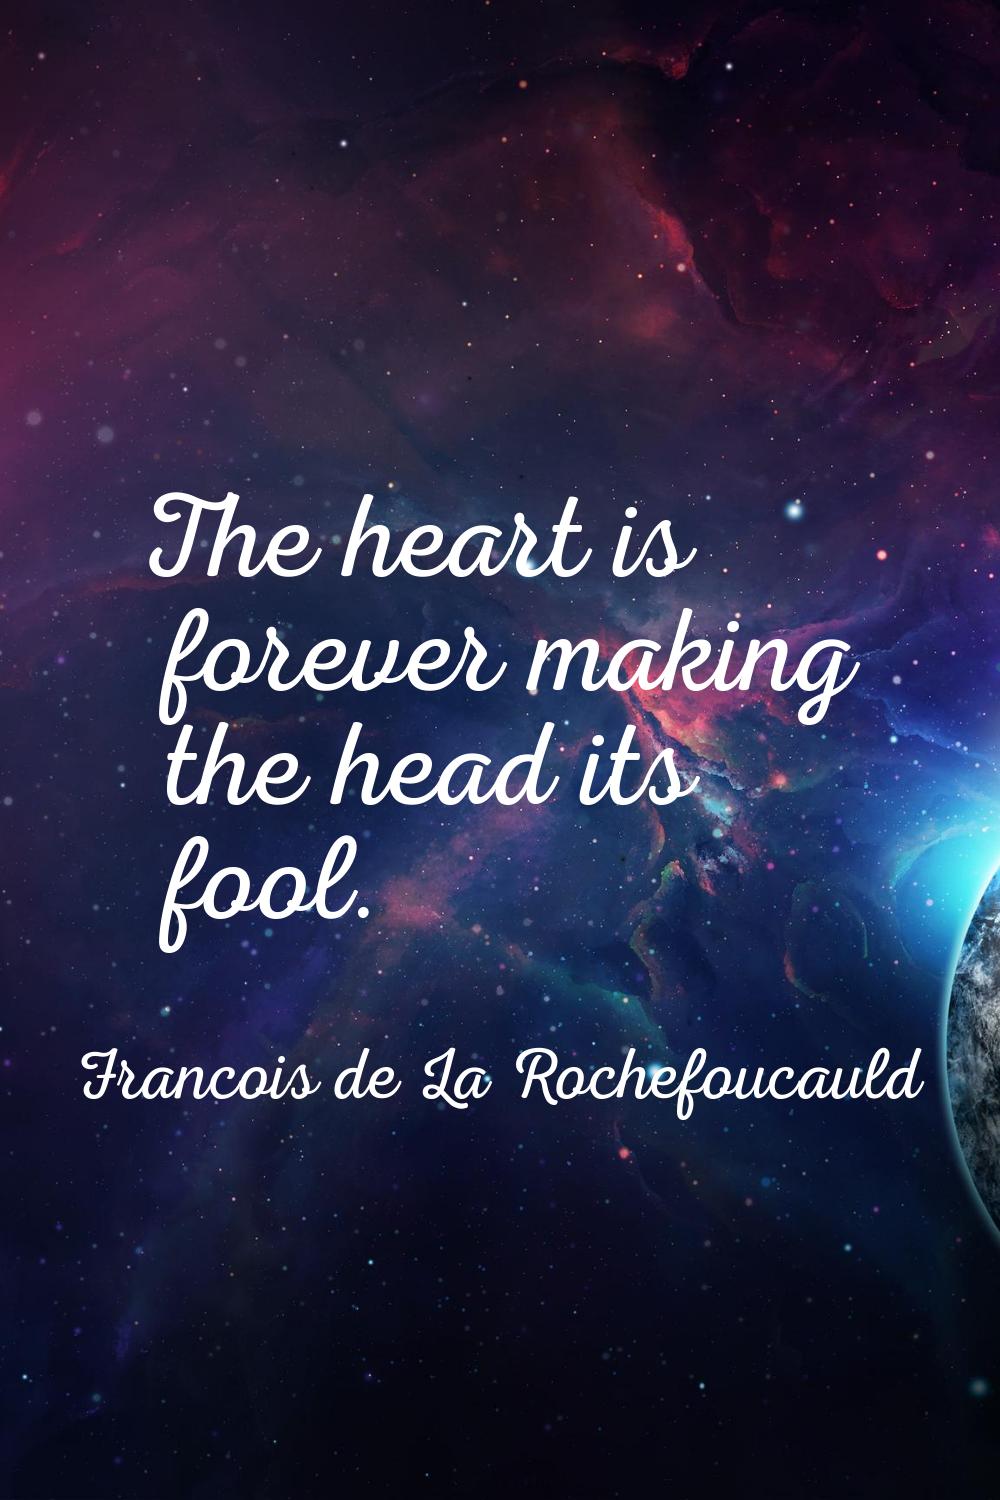 The heart is forever making the head its fool.